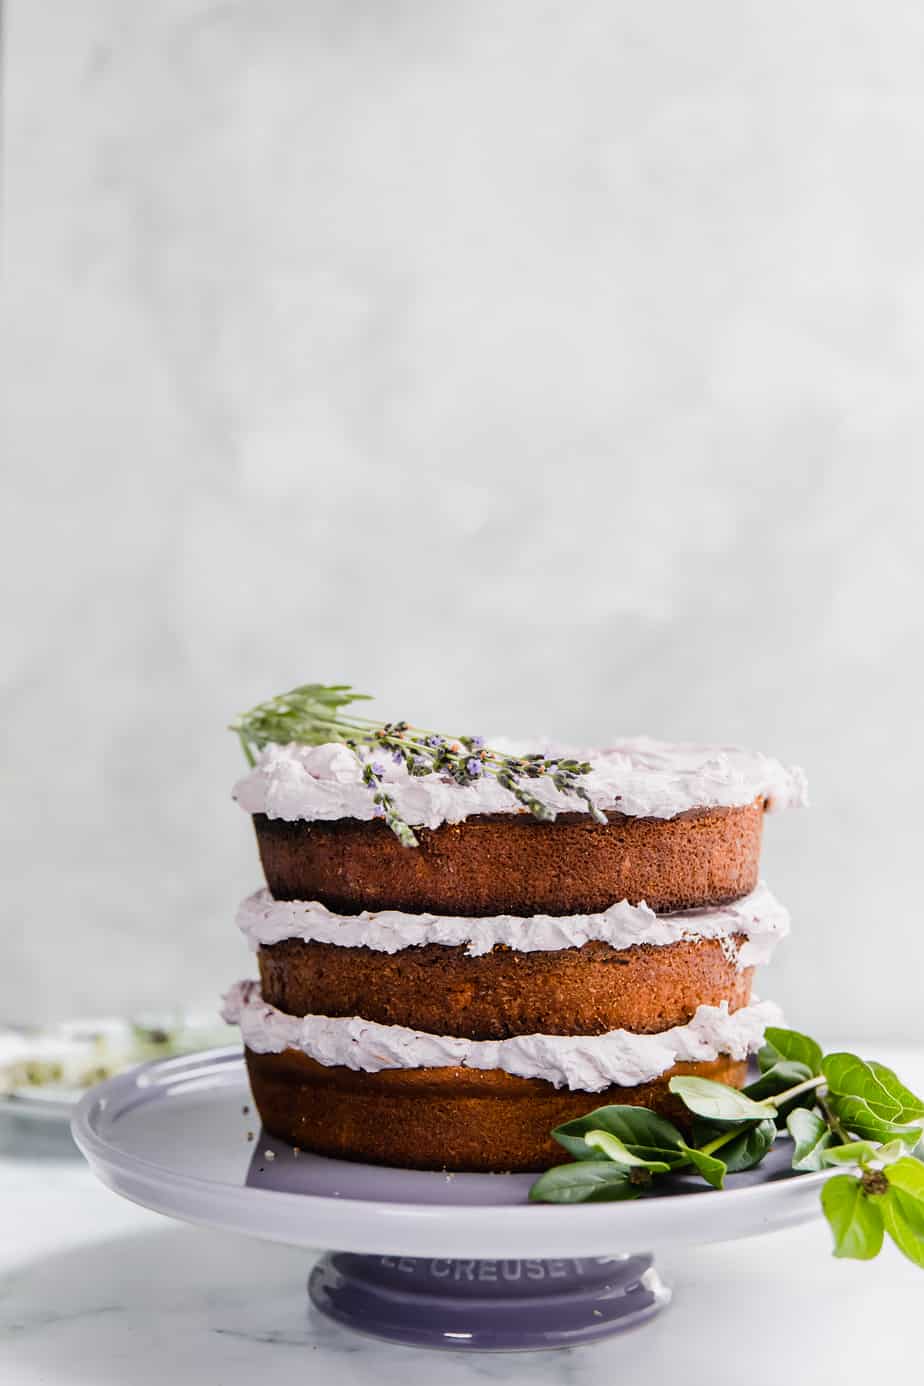 An Earl Grey Lavender Cake on a purple cake stand with fresh lavender.